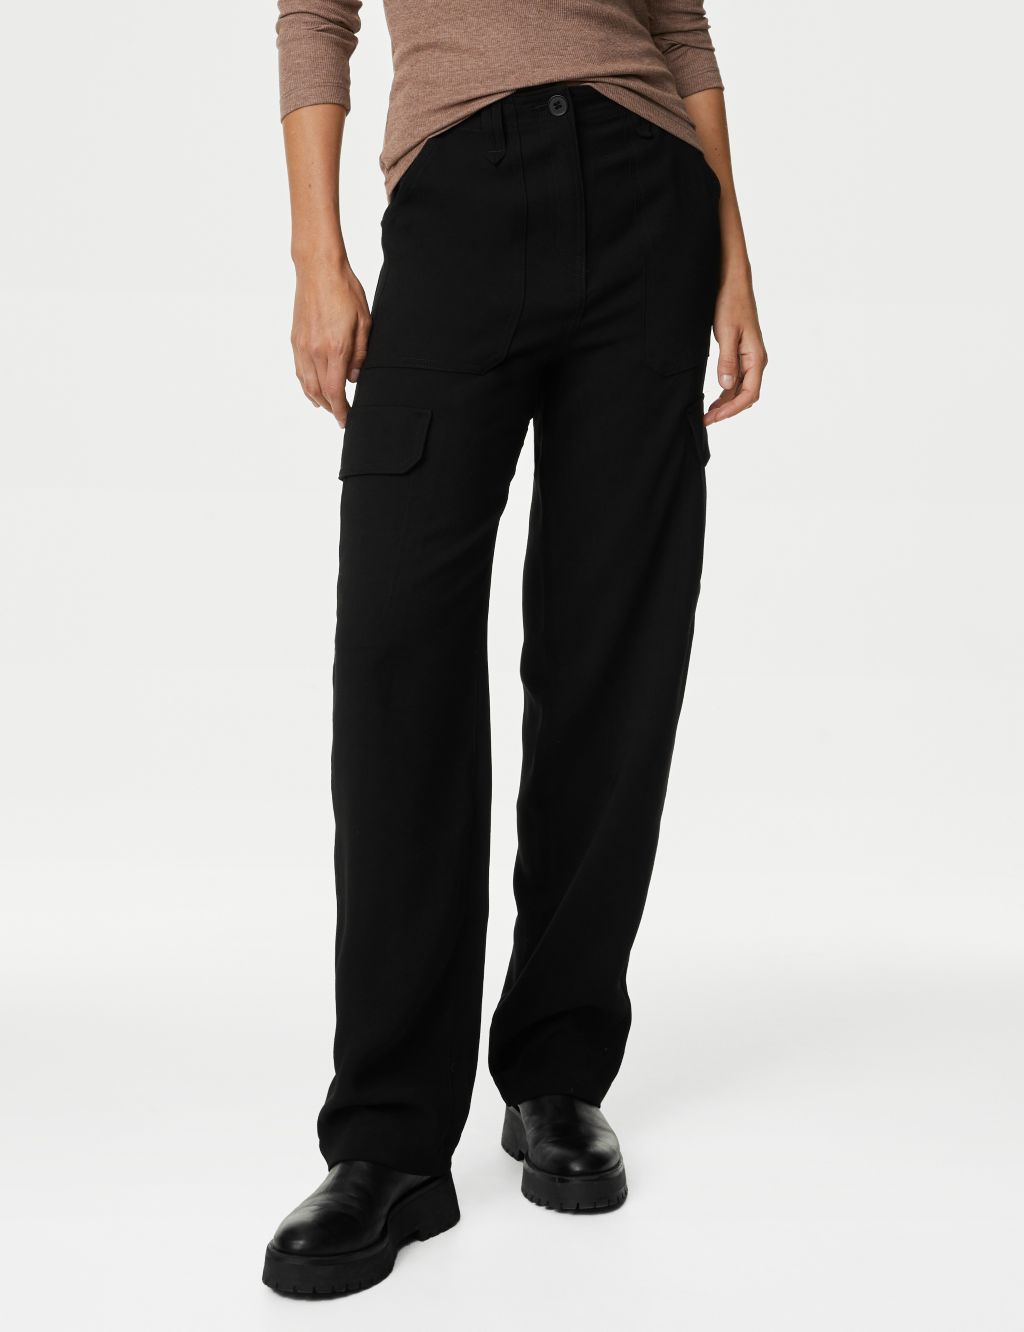 Crepe Cargo Relaxed Trousers image 5